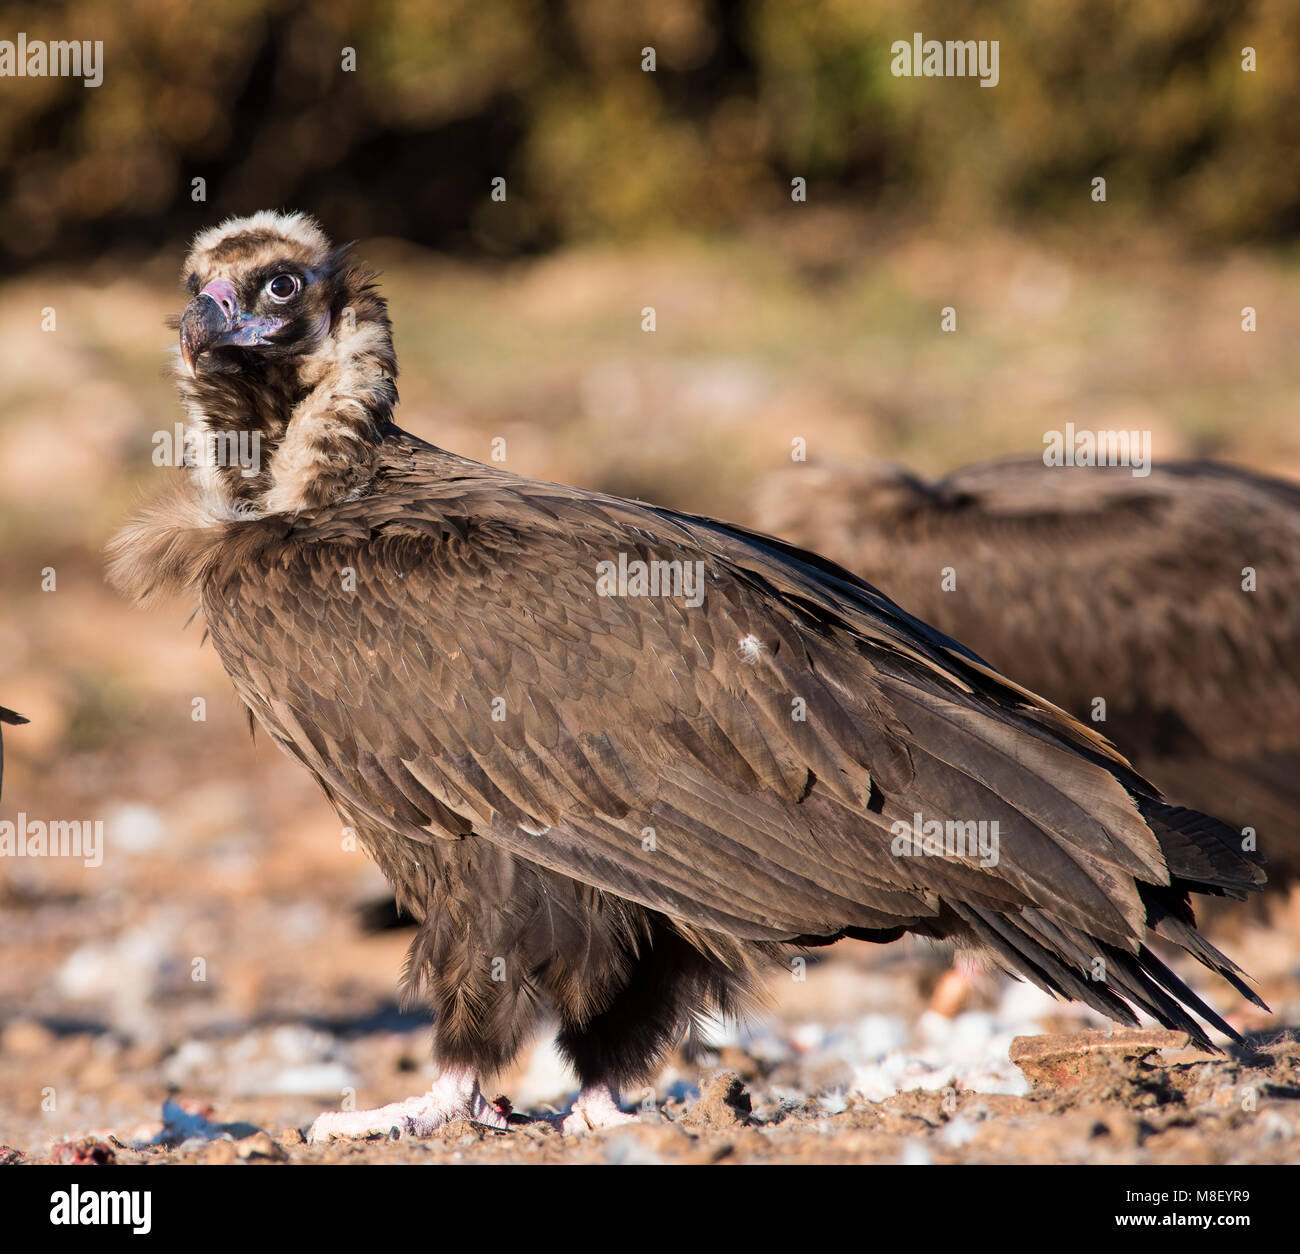 European Black/Cinereous Vulture (Aegypius monachus) sat on the ground in the Pyrenees mountains, Spain, looking face on Stock Photo